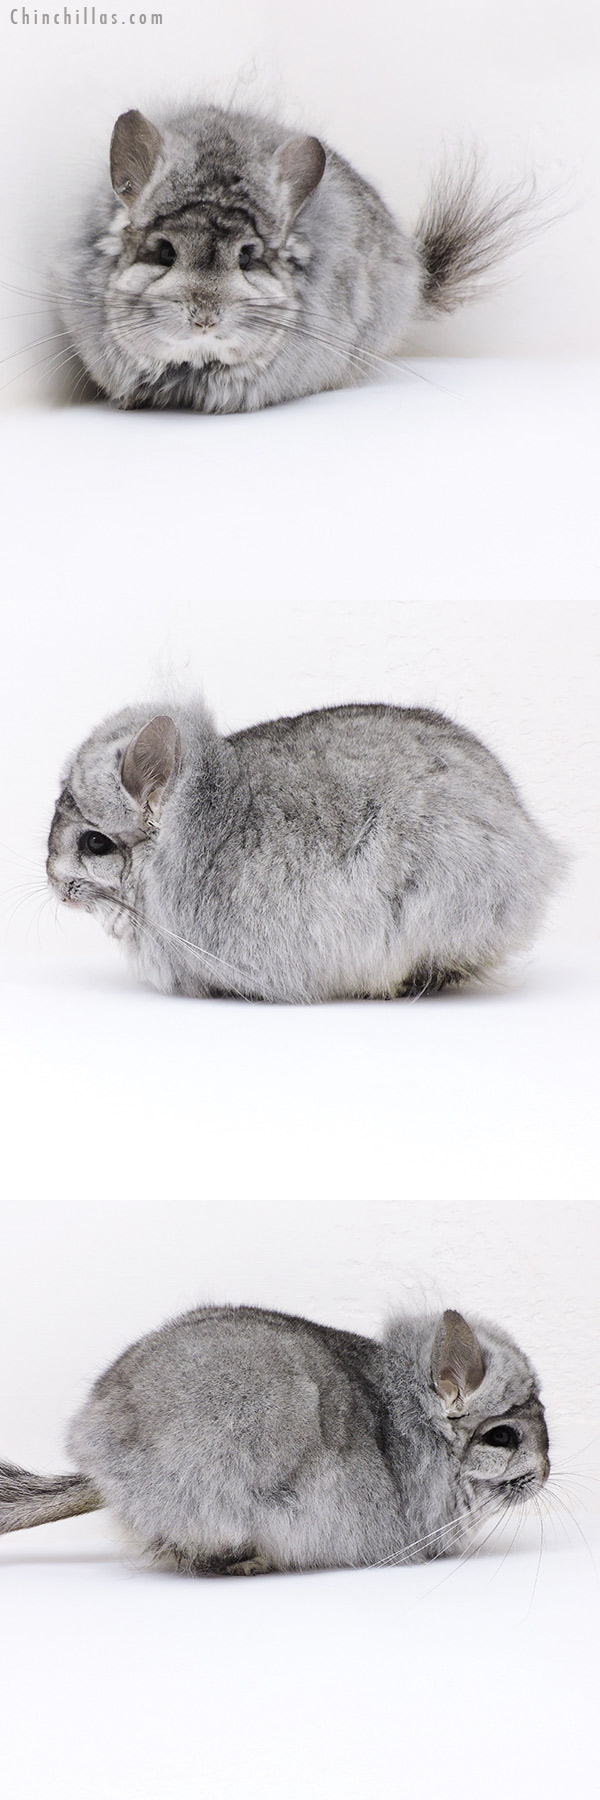 Chinchilla or related item offered for sale or export on Chinchillas.com - 19019 Large Standard ( Violet Carrier ) G2  Royal Persian Angora Male Chinchilla